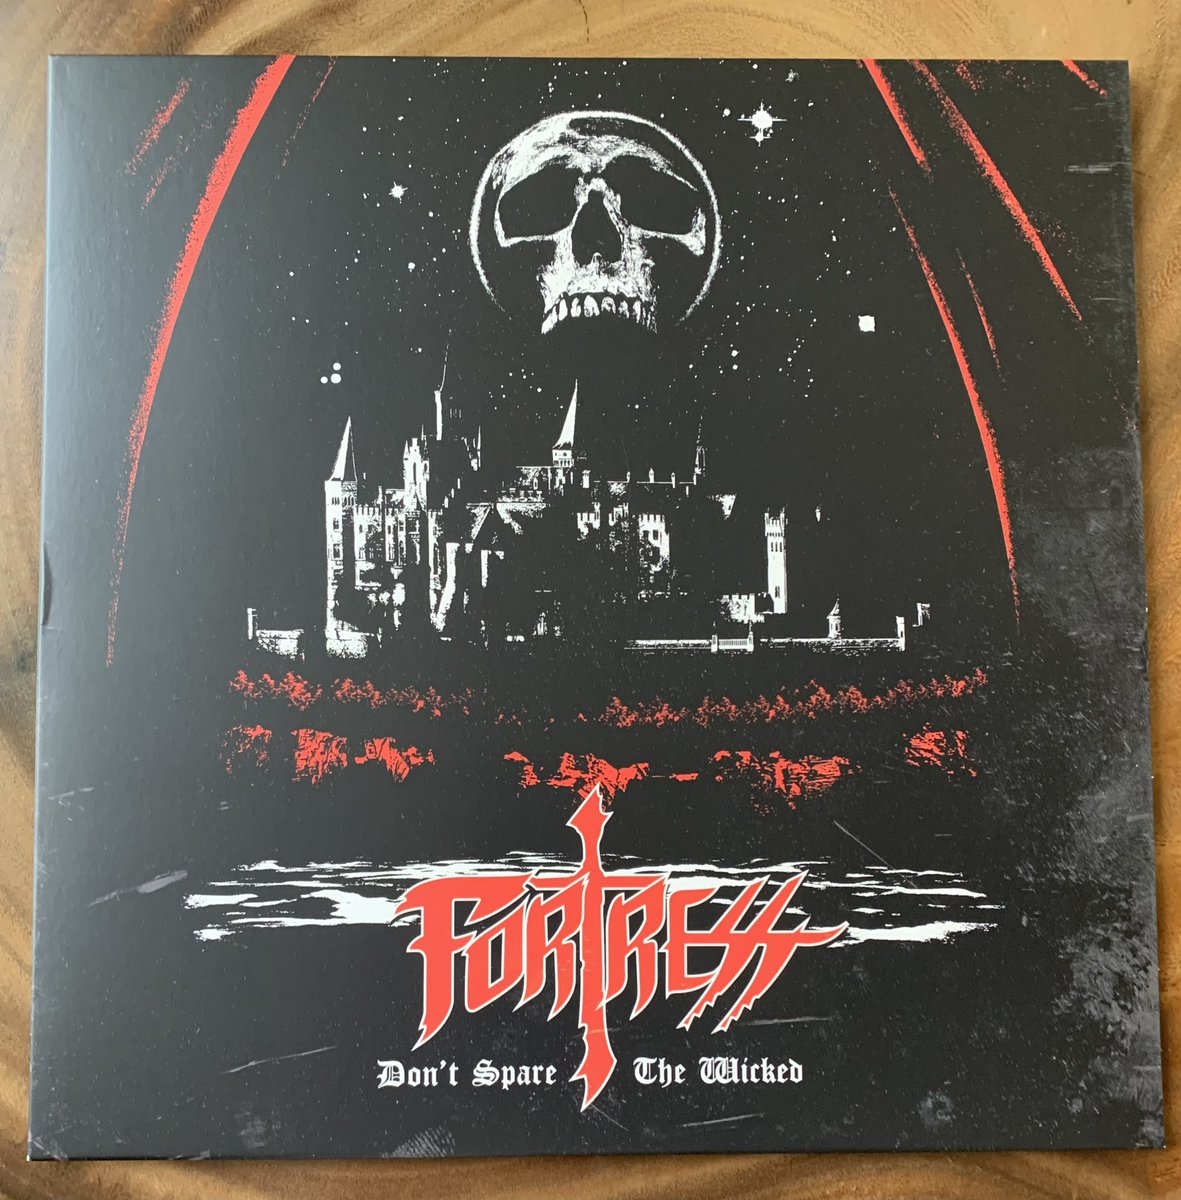 What a fab slab of Lizzy Borden / Malice inspired #HeavyMetal this one is! #NowPlaying️ Fortress - Dont Spare the Wicked. My only gripe with this Whittier bunch is that the album is a tad too short!! @KManriffs